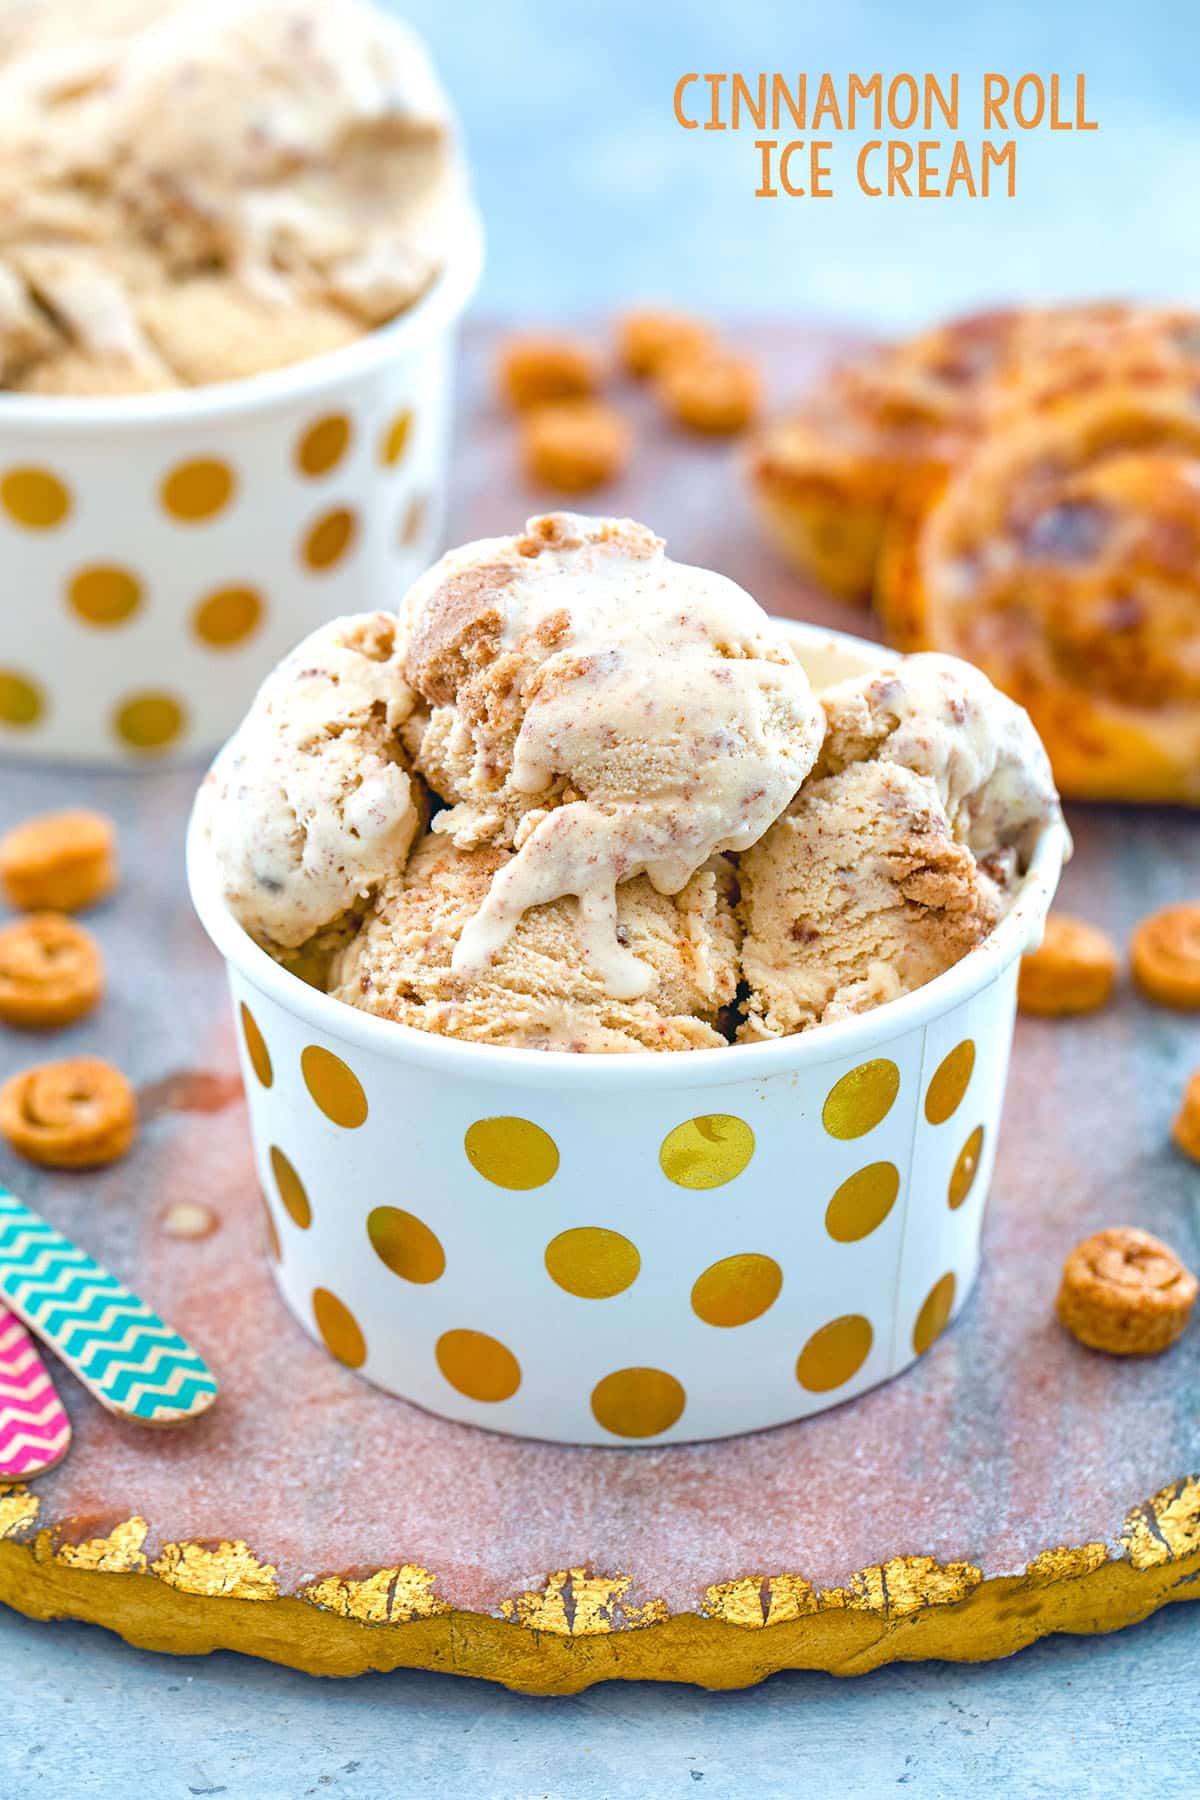 Head-on closeup view of a small cup of cinnamon roll ice cream with mini cinnamon rolls, large cinnamon rolls, and second cup of ice cream in background with recipe title at top.